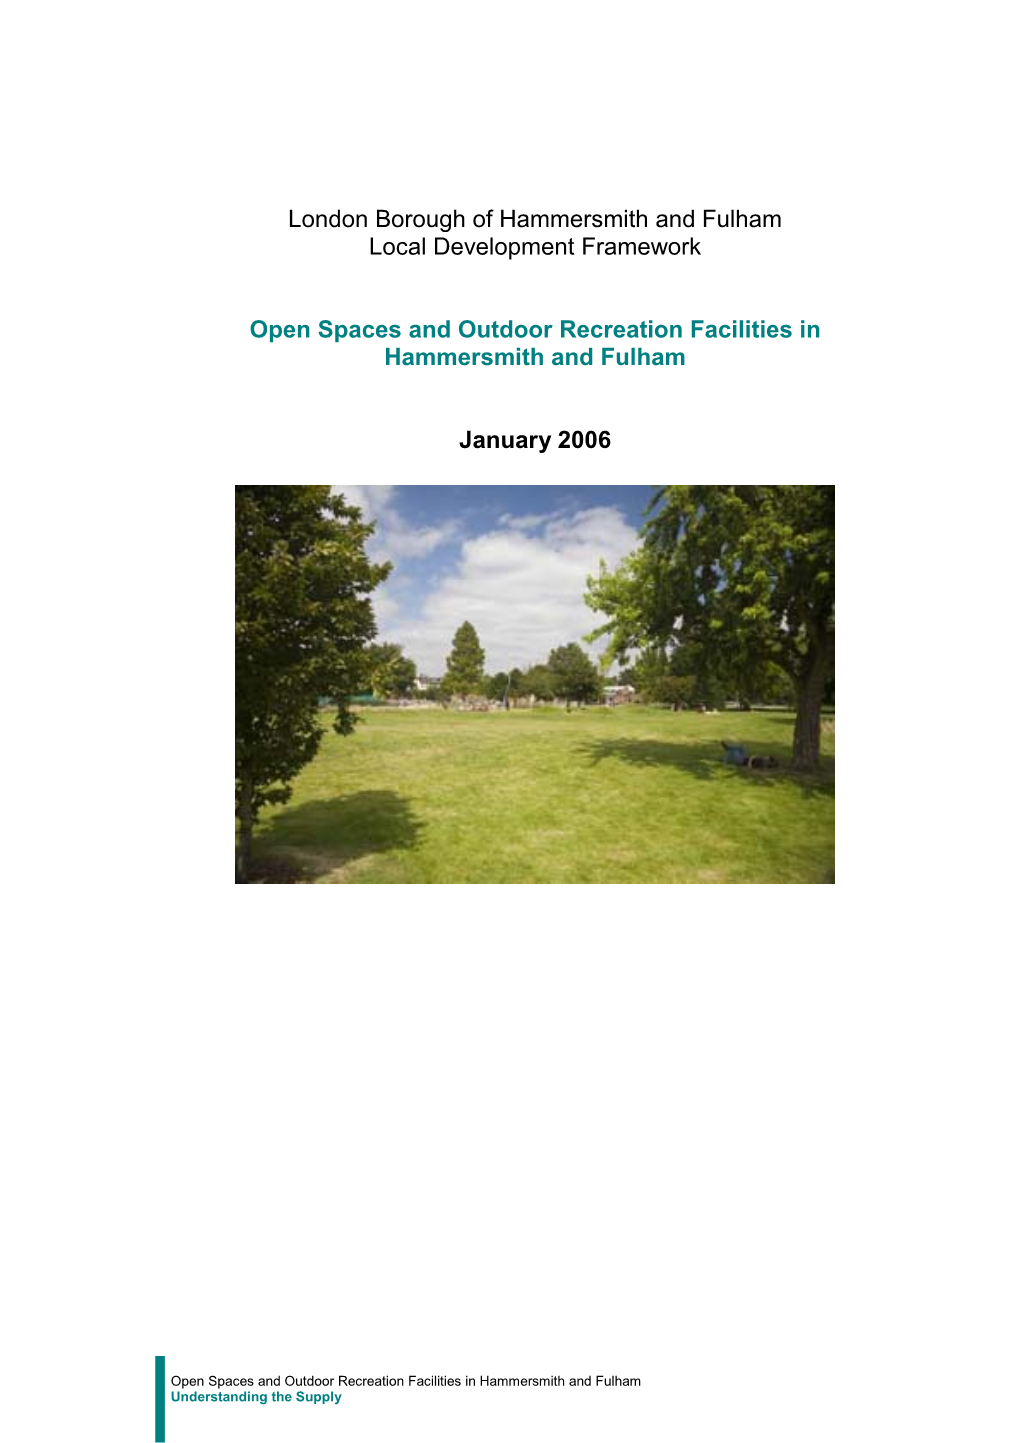 London Borough of Hammersmith and Fulham Local Development Framework Open Spaces and Outdoor Recreation Facilities in Hammersmit